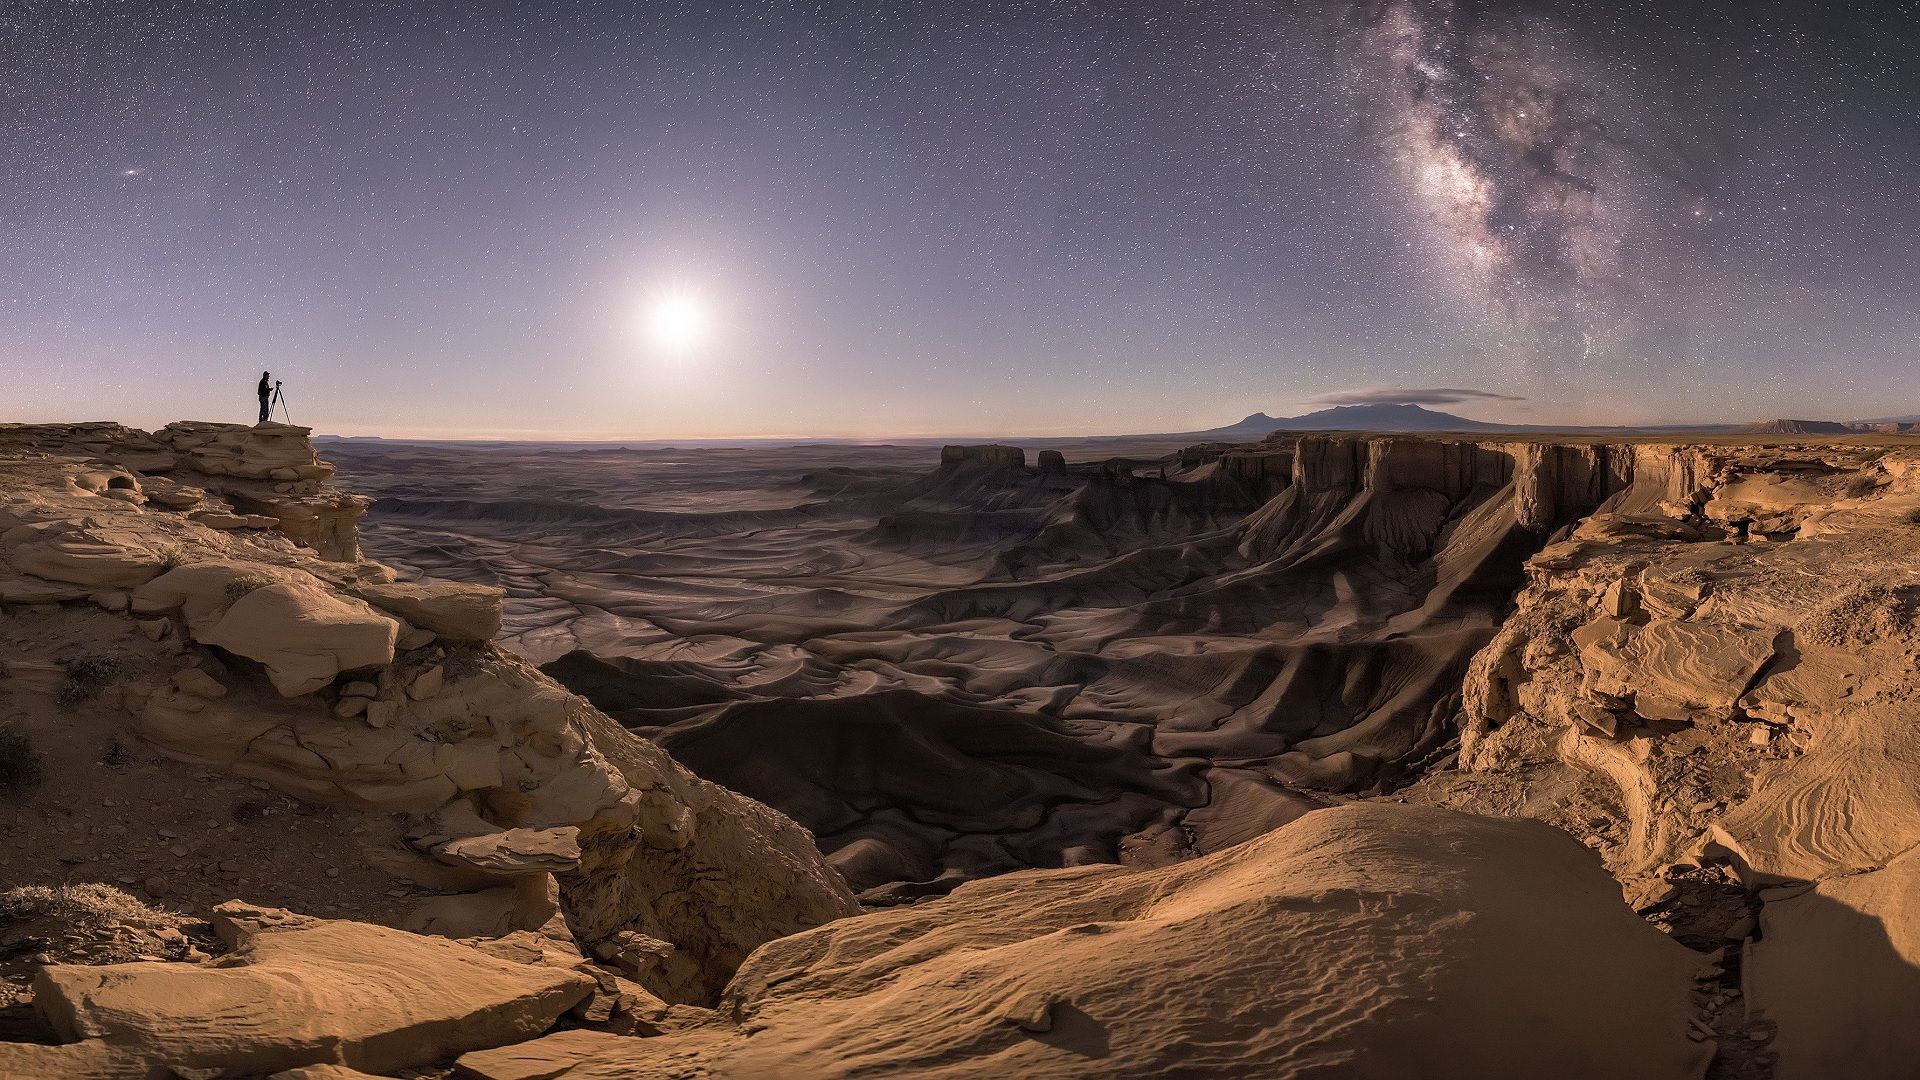 17 Of The Best Astronomy Photographs That Are Out Of This World image 3